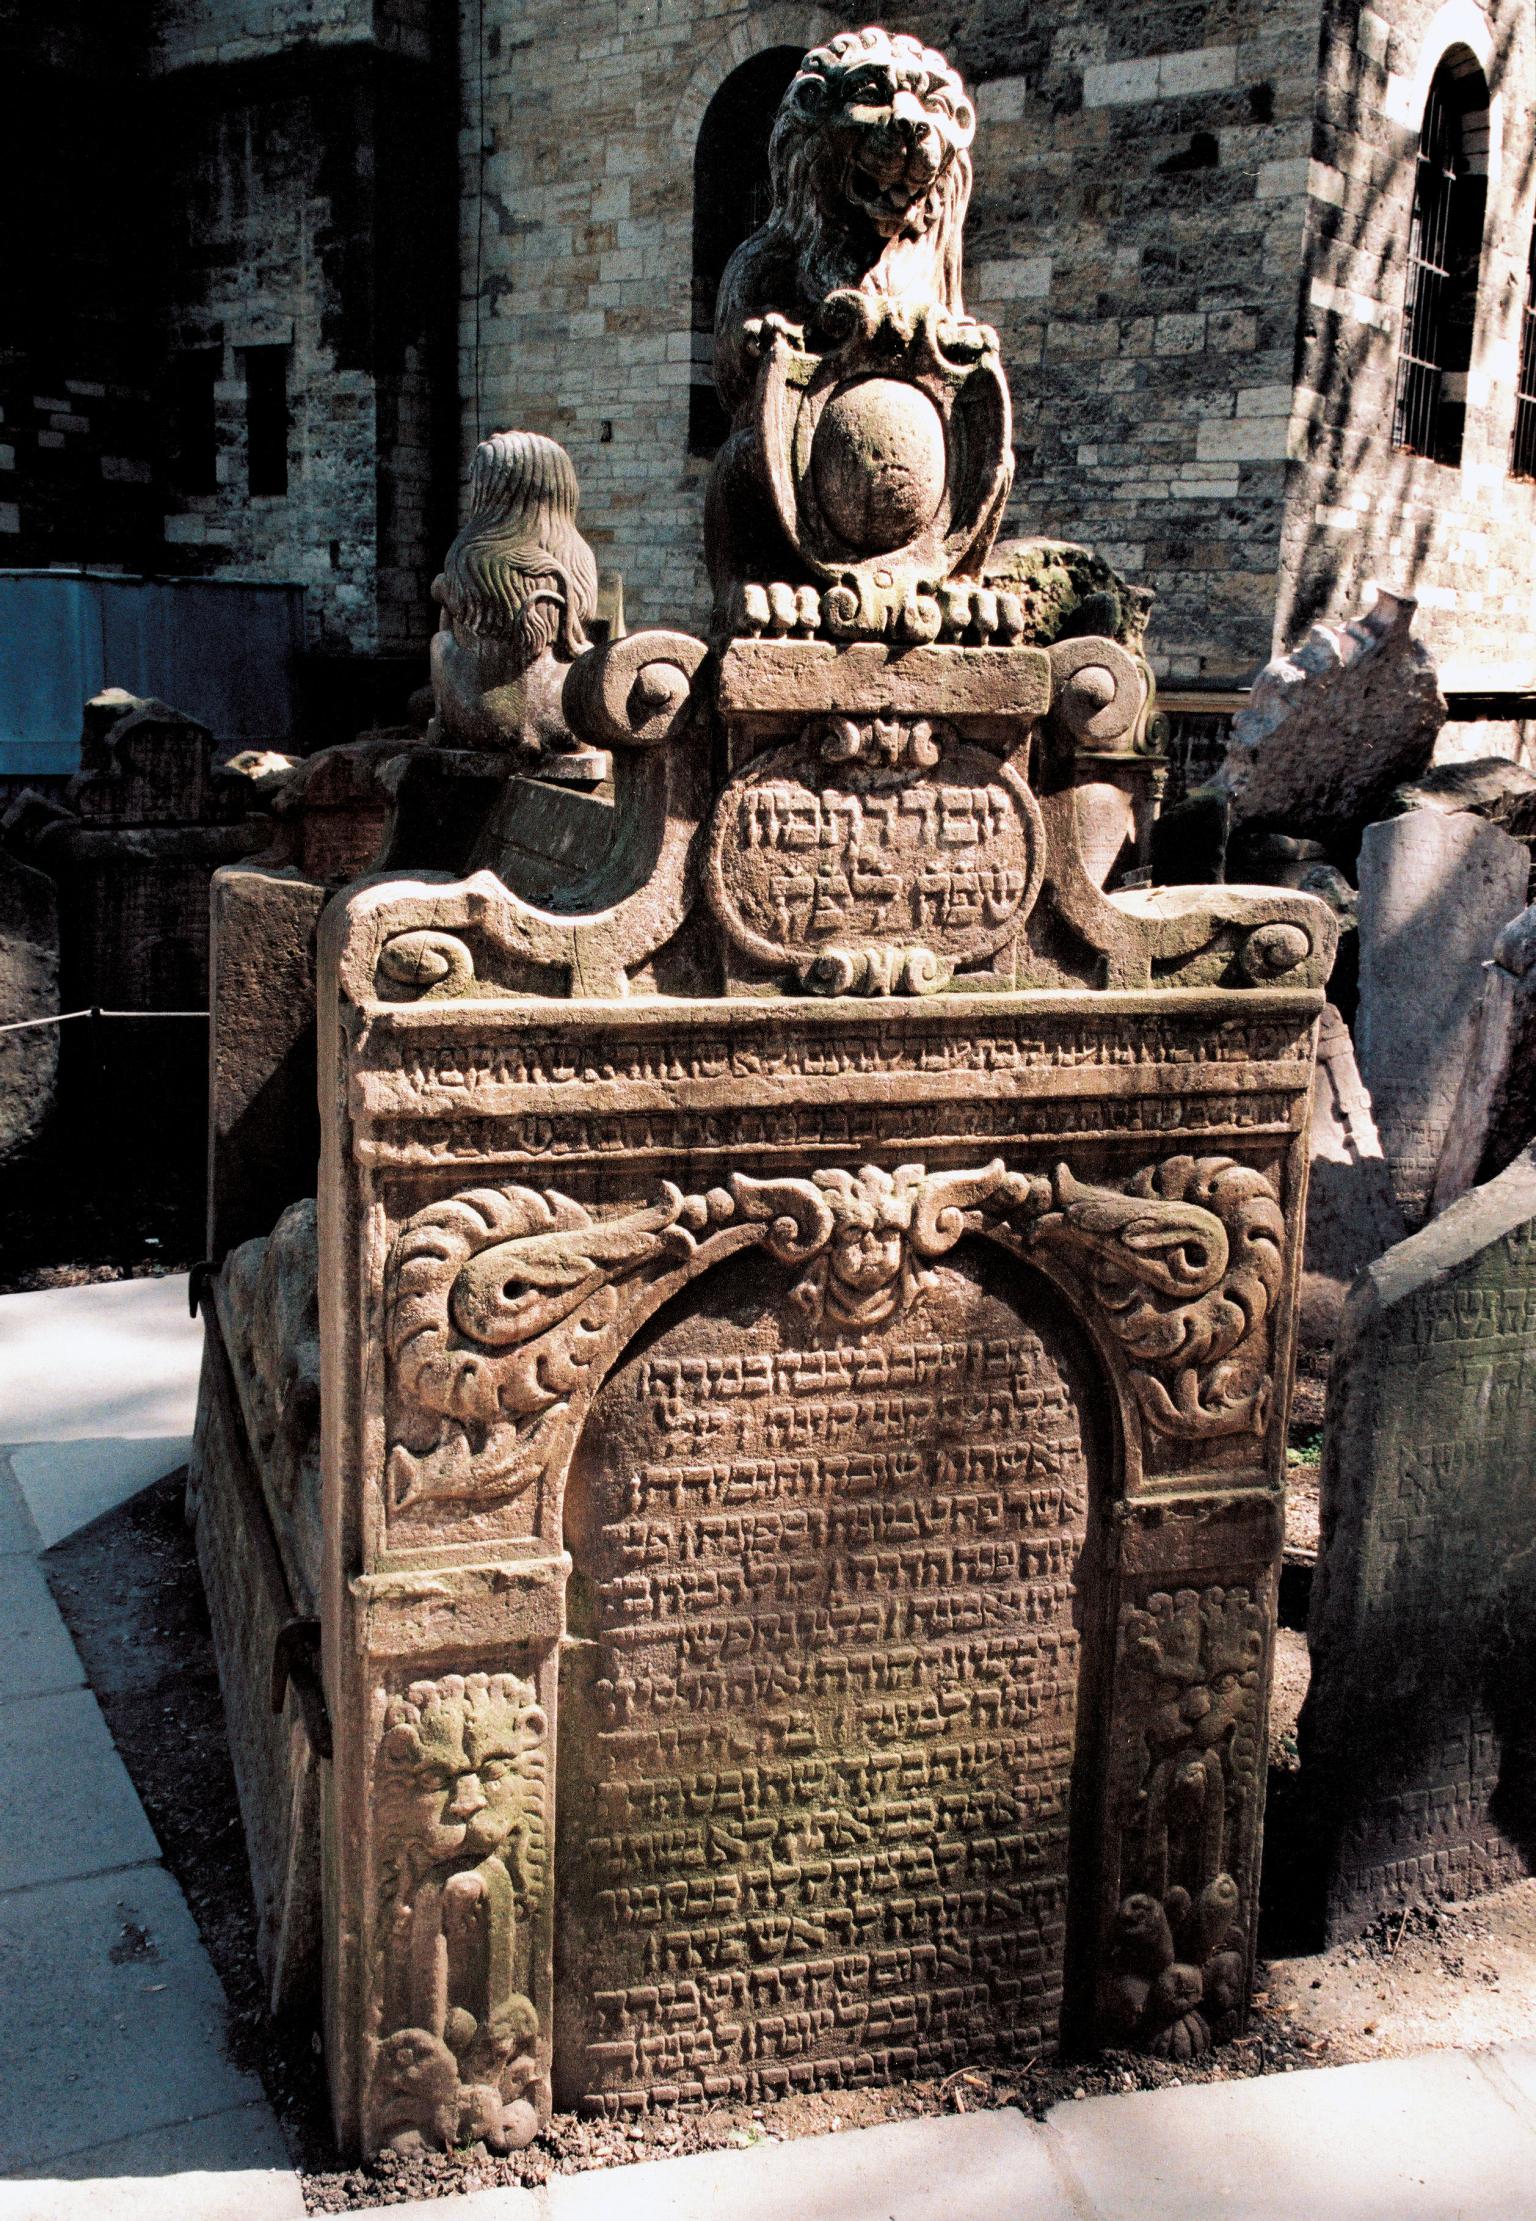 Tomb with high tombstones on either end, lions, shield and floral decorations on top, and Hebrew inscription on surface of stone.